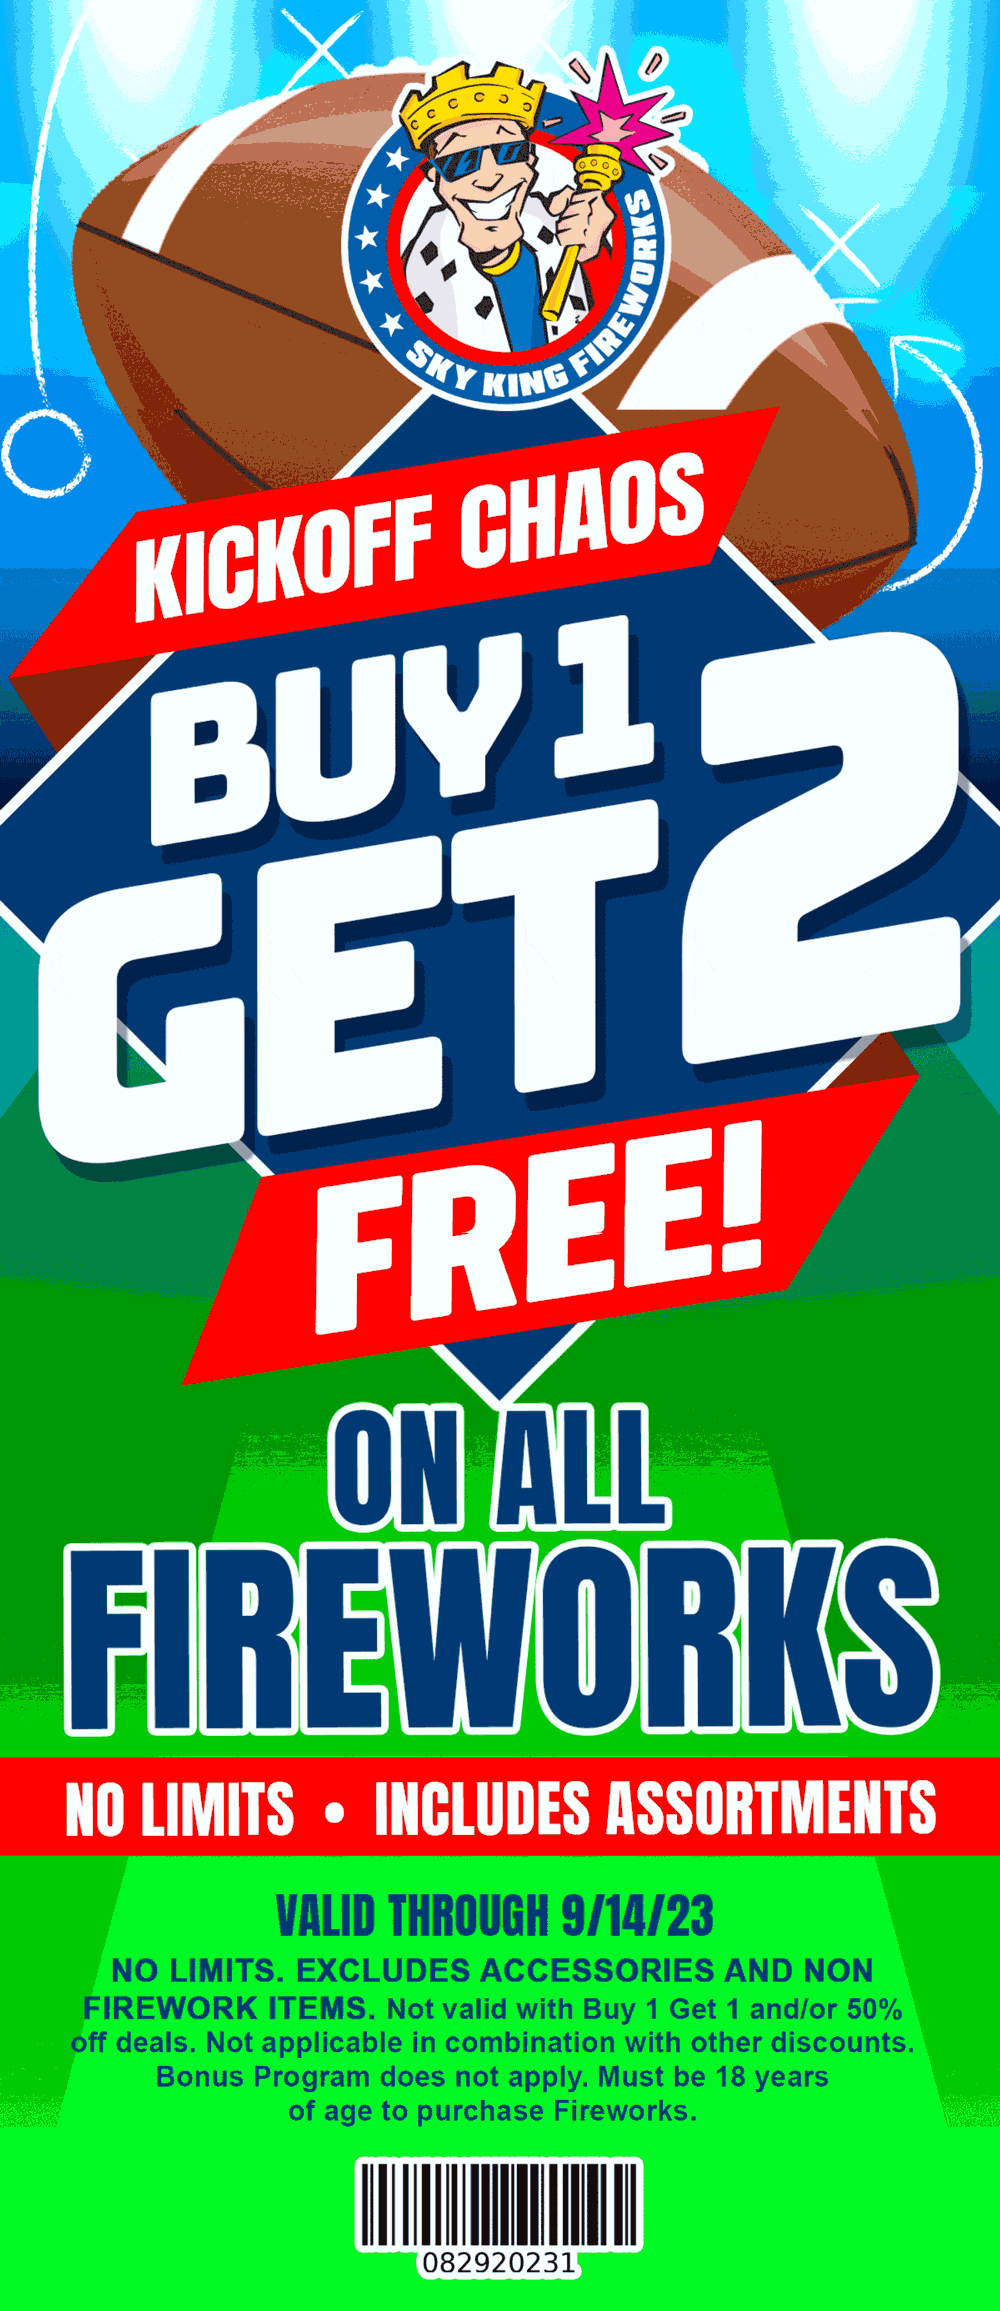 Sky King fireworks stores Coupon  3-for-1 on everything at Sky King fireworks #skykingfireworks 